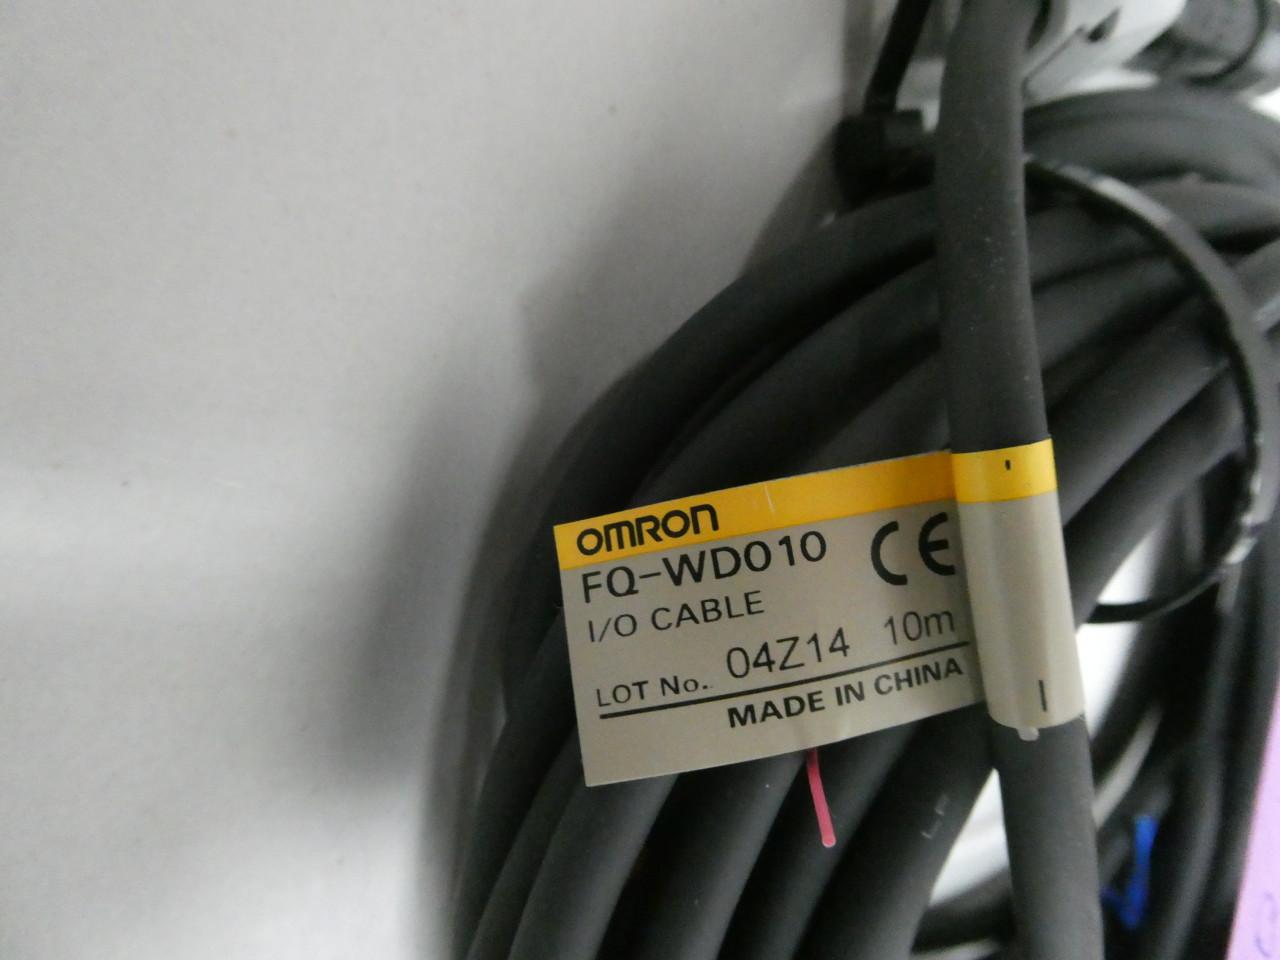 OMRON FQ-WD010 CAMERA 10M CORDSET CABLE